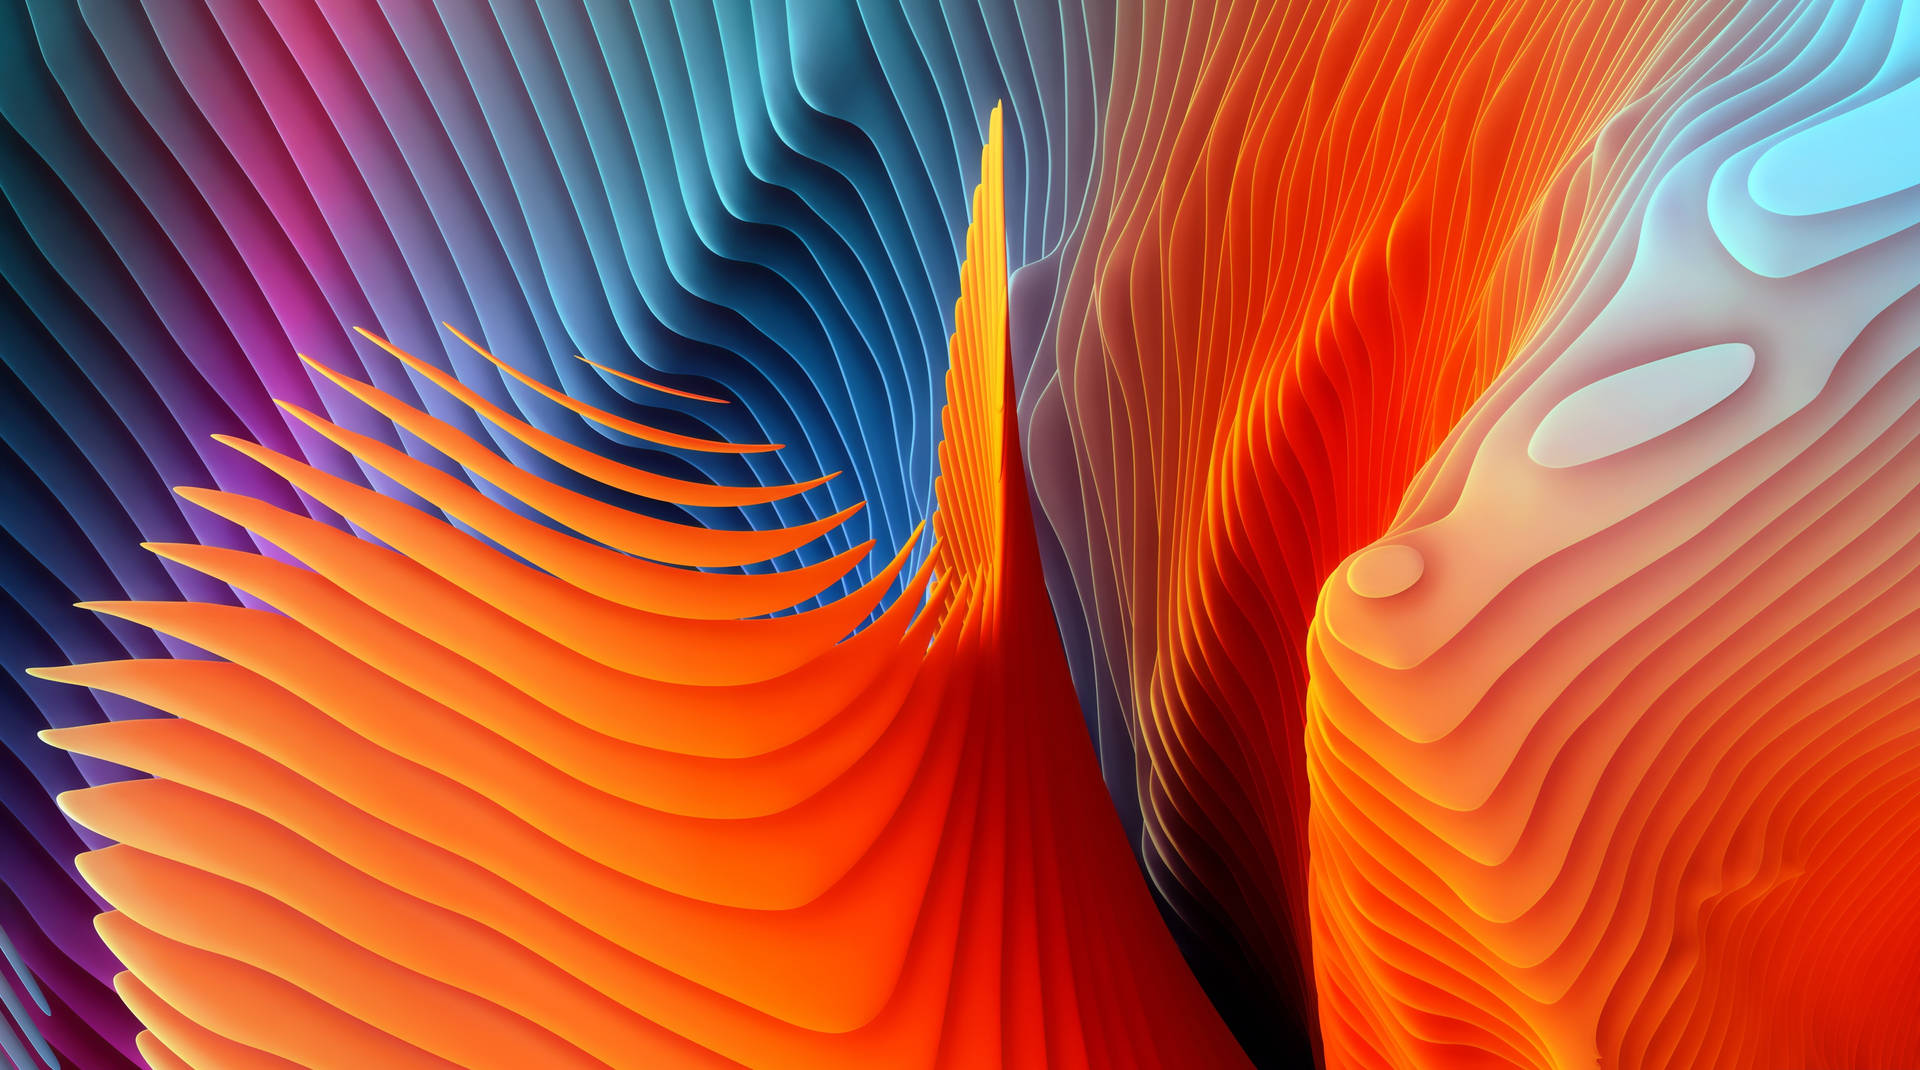 Layered Abstract Macbook Air Background